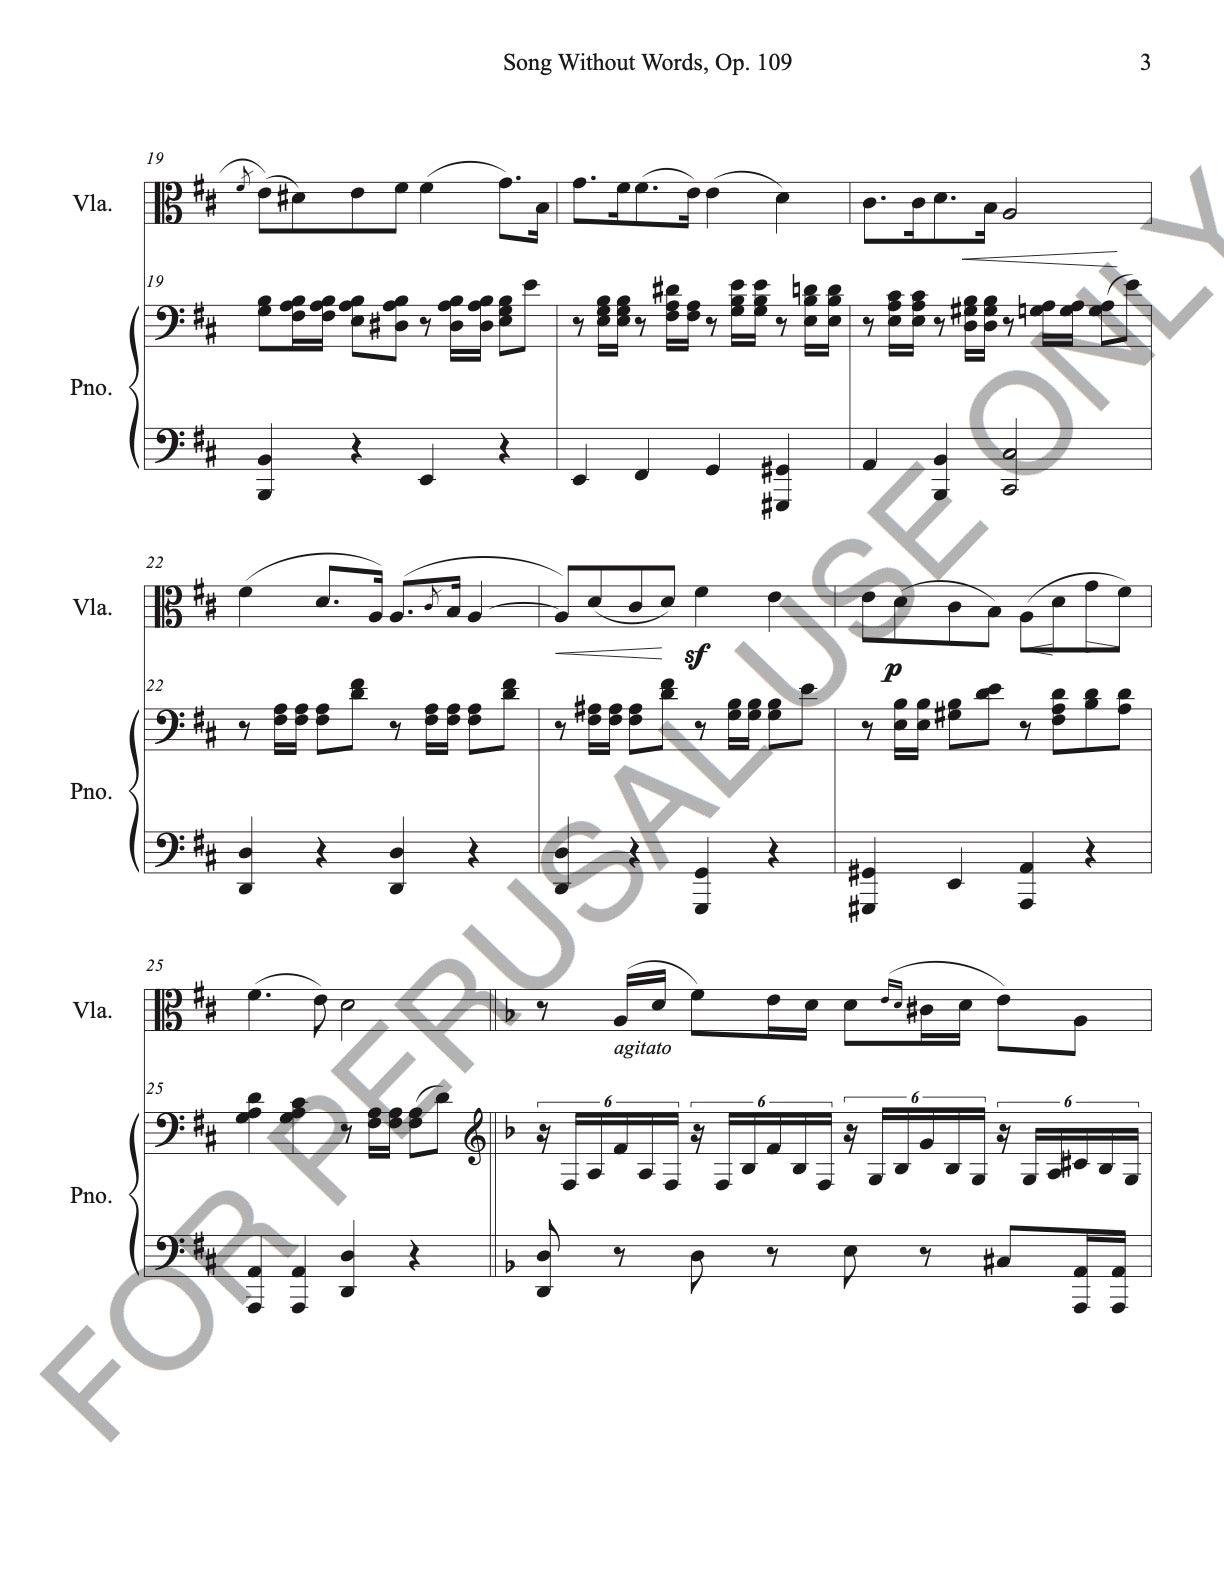 Viola and Piano: Mendelssohn's Song Without Words, Op. 109 (score+parts+mp3) - ChaipruckMekara